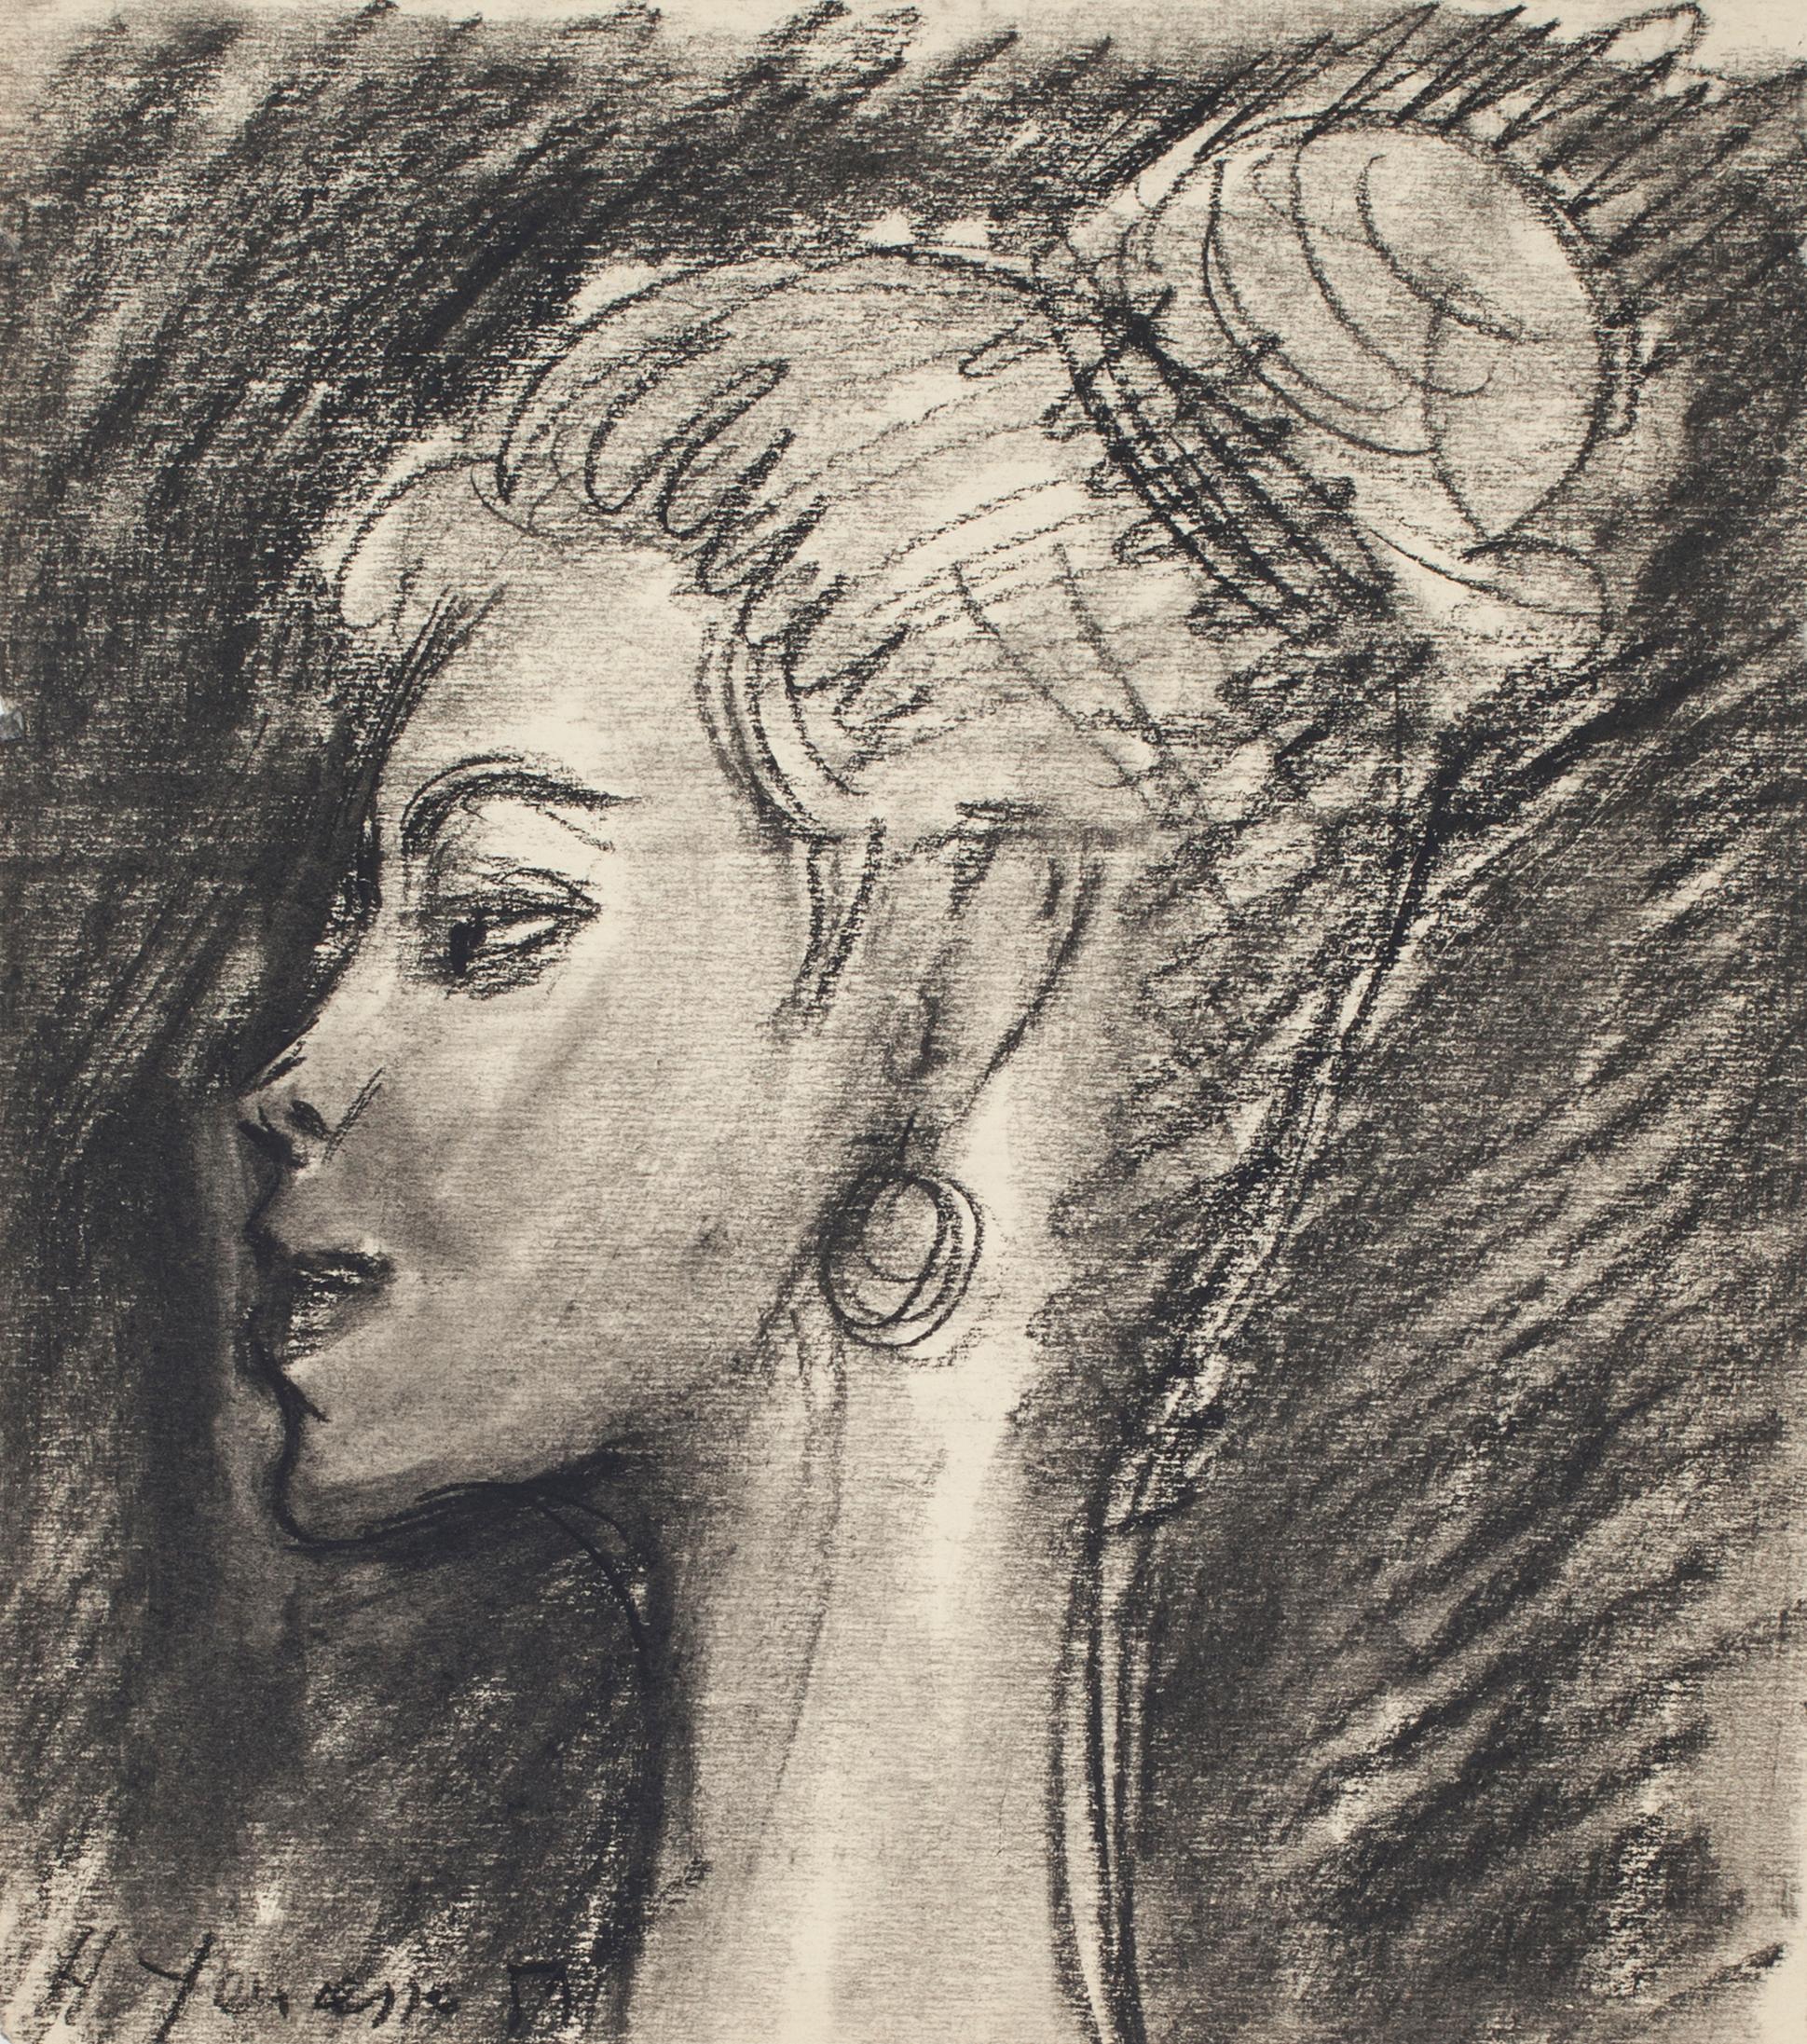 Portrait - Pencil and Charcoal Drawing by H. Yencesse - 1950s